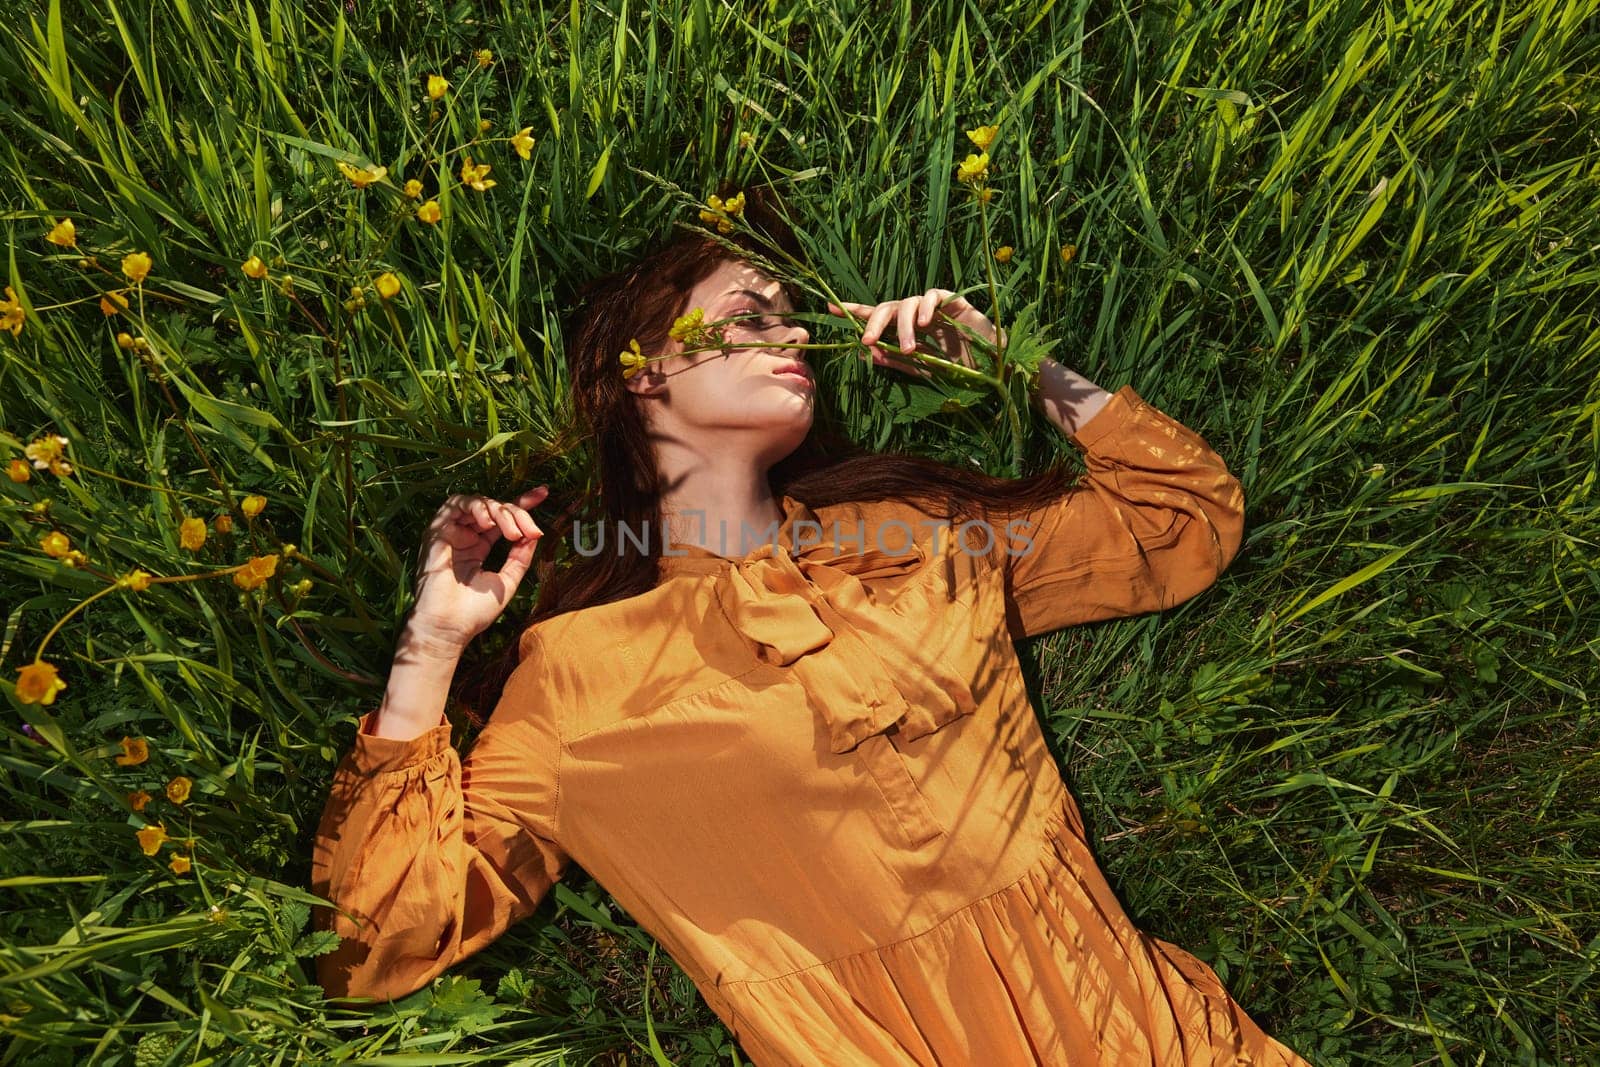 a calm woman with long red hair lies in a green field with yellow flowers, in an orange dress with her eyes closed, spreading her arms to the sides, enjoying peace and recuperating. High quality photo